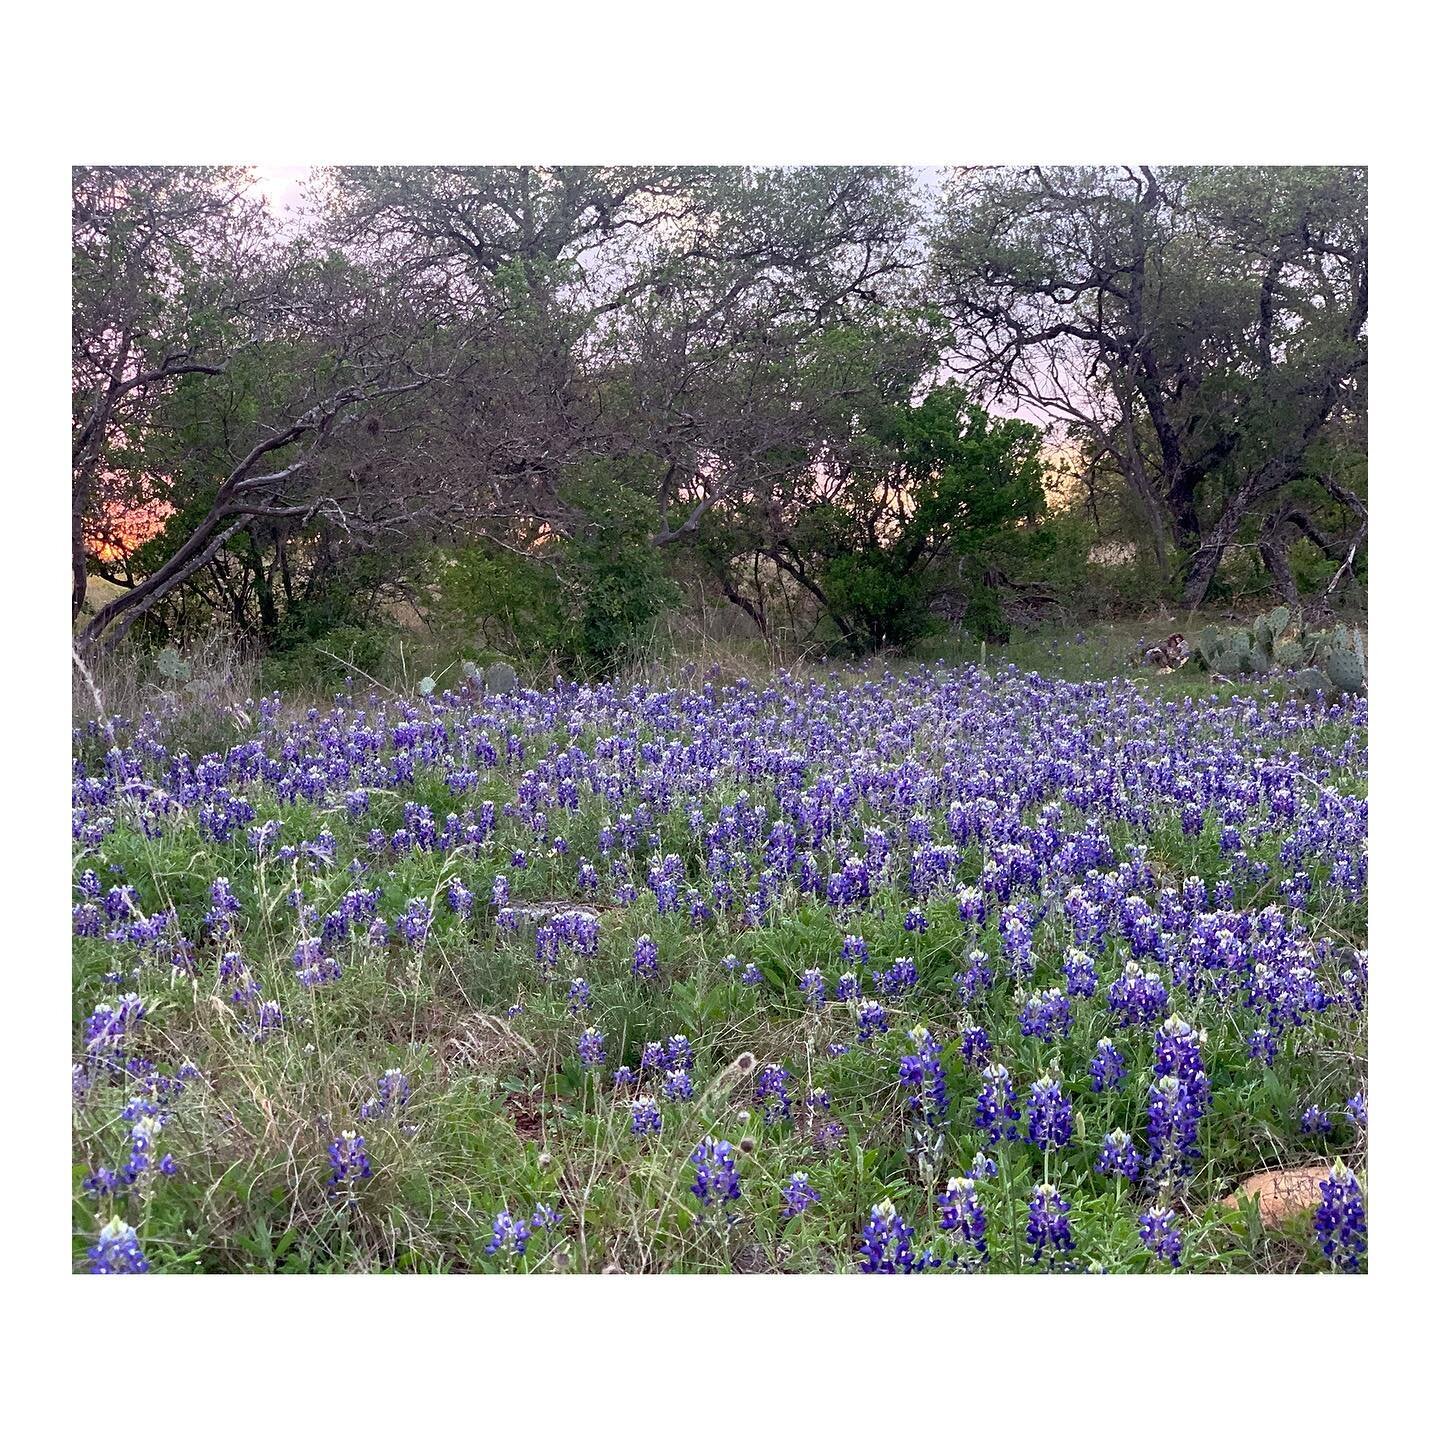 (even more) TX wildflowers 🌾
Spring 2021
🌤
*spent 3 months in Austin, replaced people with plants